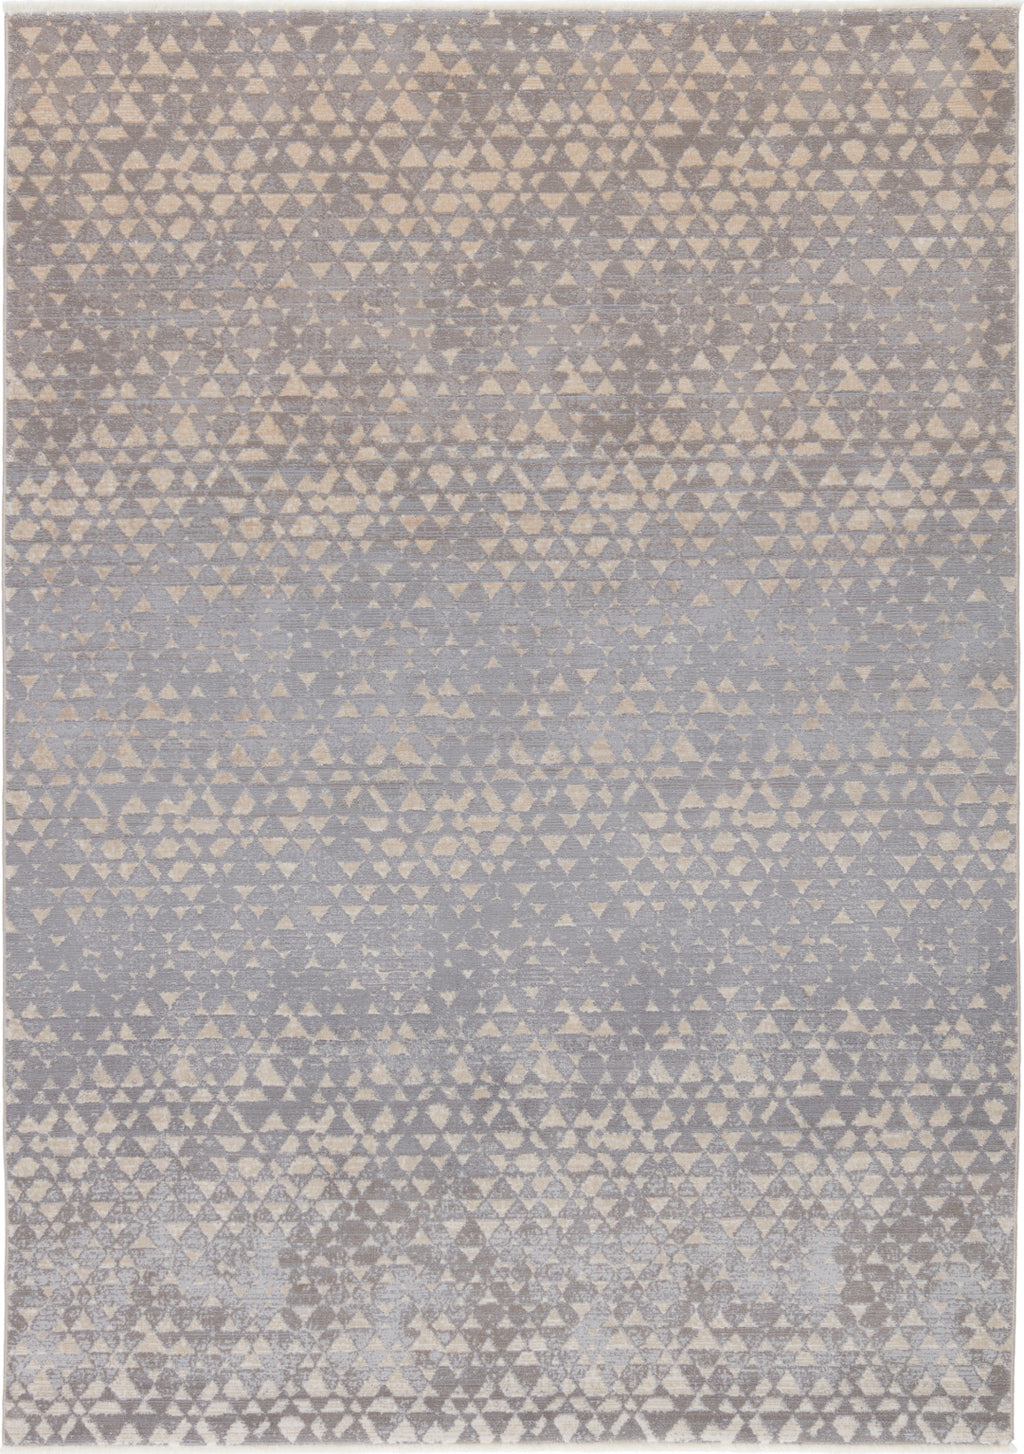 Jaipur Living Land Sea Sky Sierra Gray/Taupe Area Rug by Kevin O'Brien - Top Down